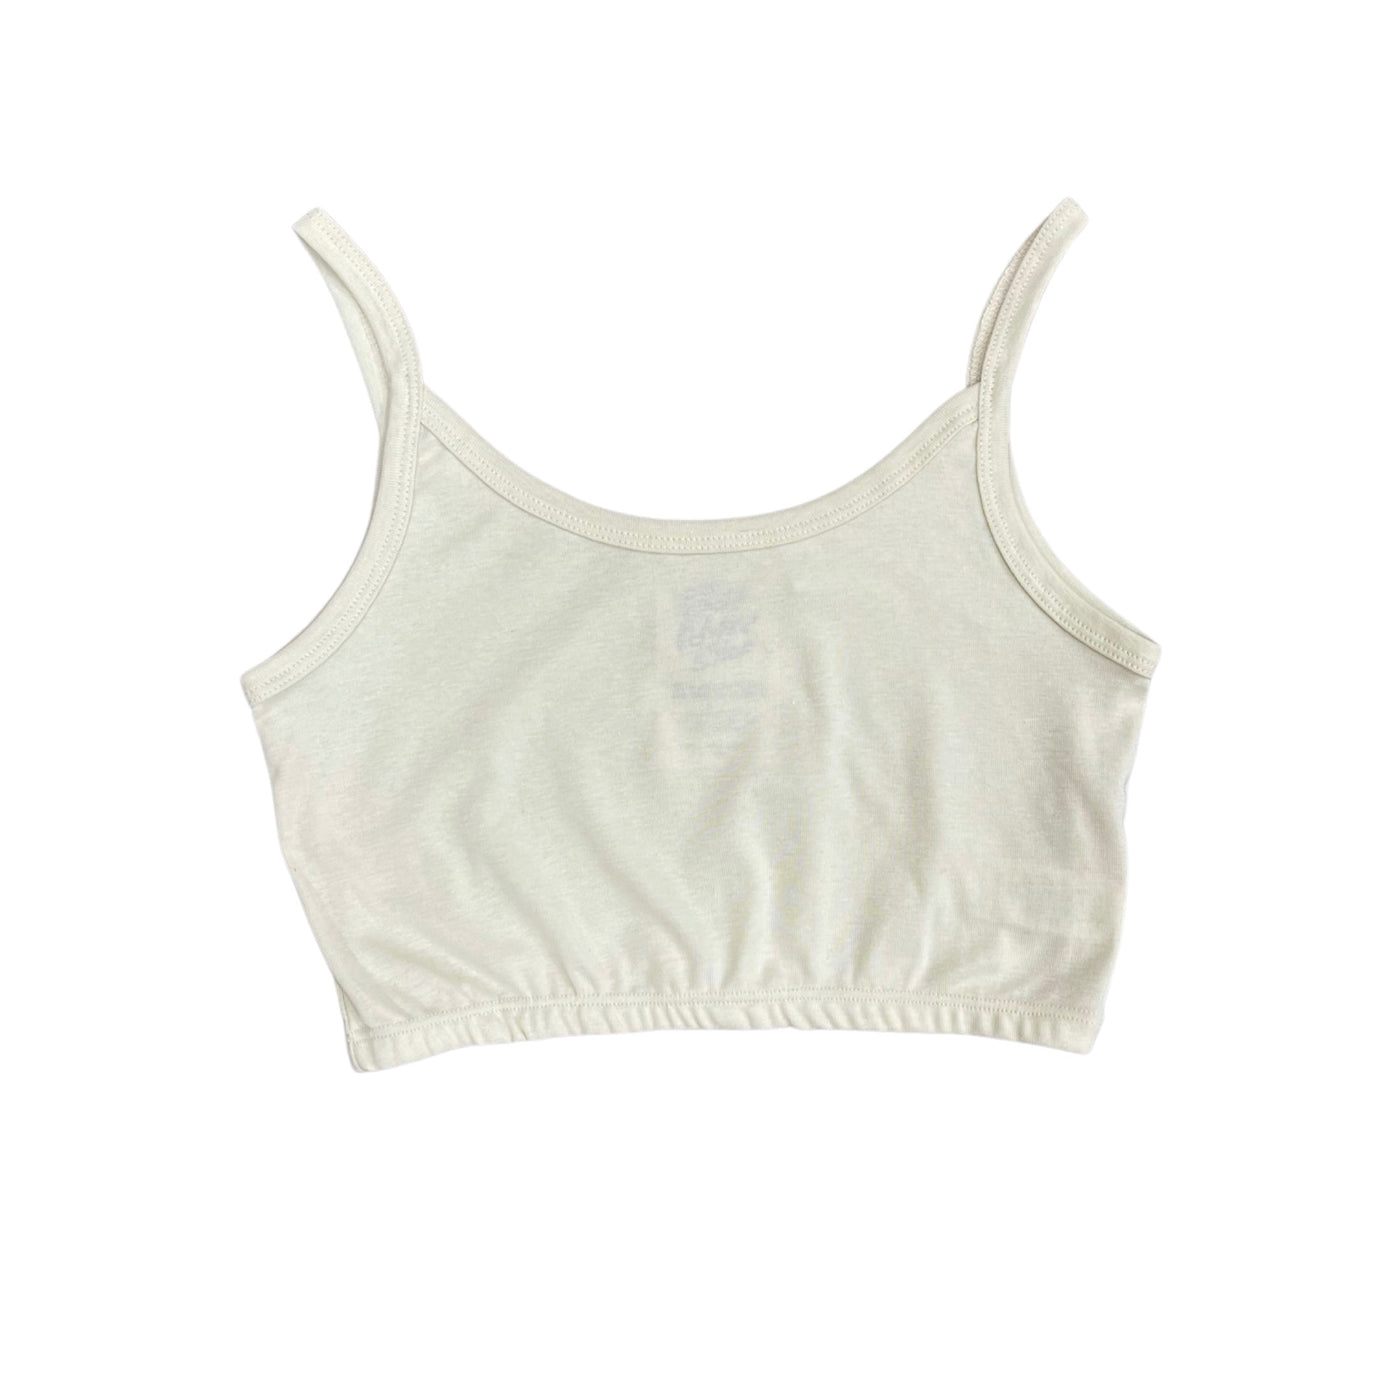 Natural colored tank top with thin straps and elastic on the hem.  